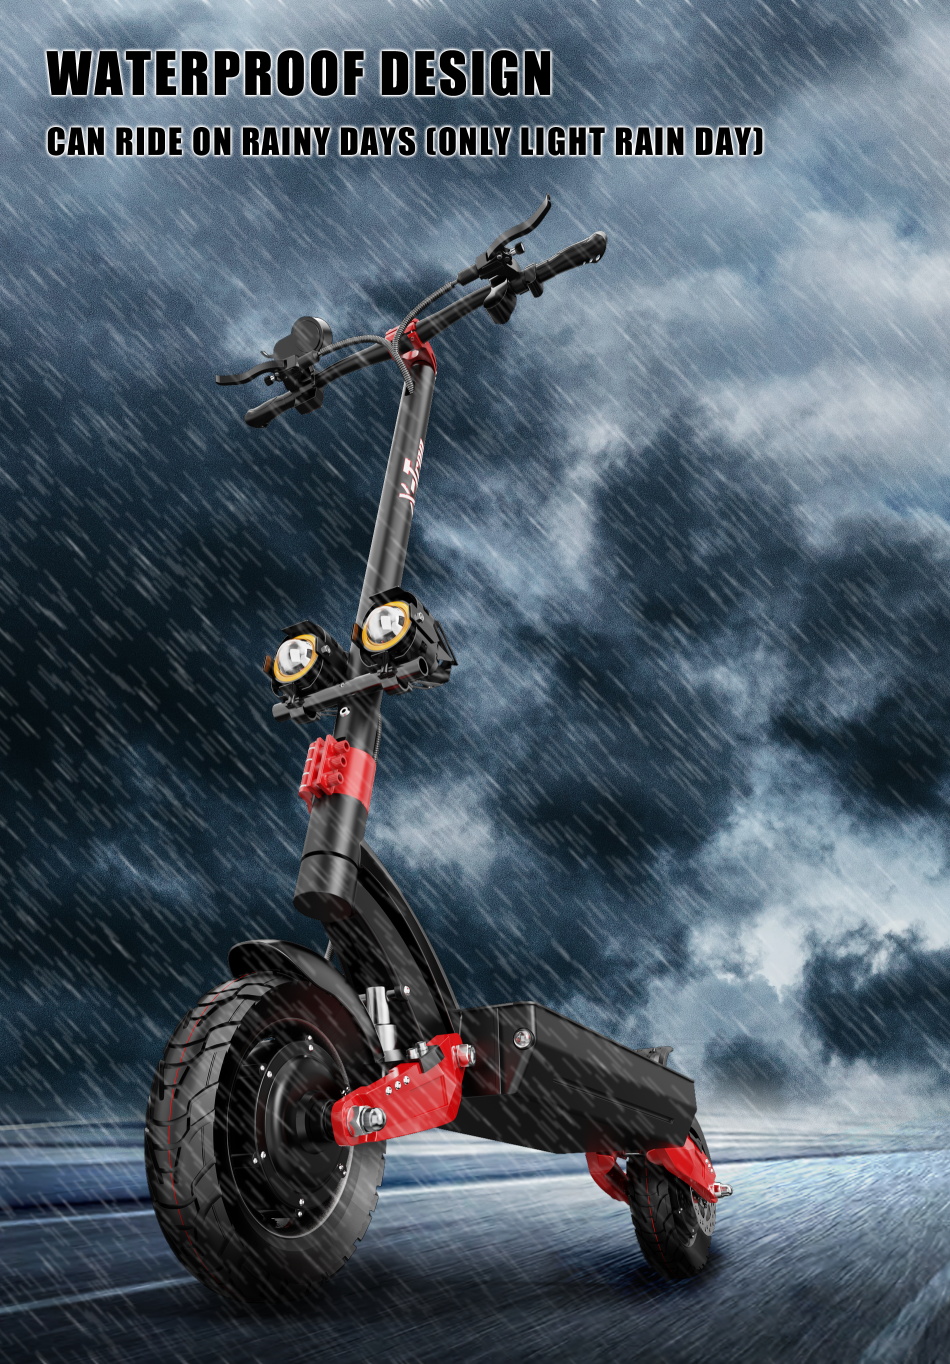 X-Tron X10 Pro 10 inch Folding Off-Road Electric Scooter 1600W *2 Motor 60V 20.8Ah Battery Max speed 65-70km/h Max load 150KG Hydraulic brake Aluminum alloy Body - Red